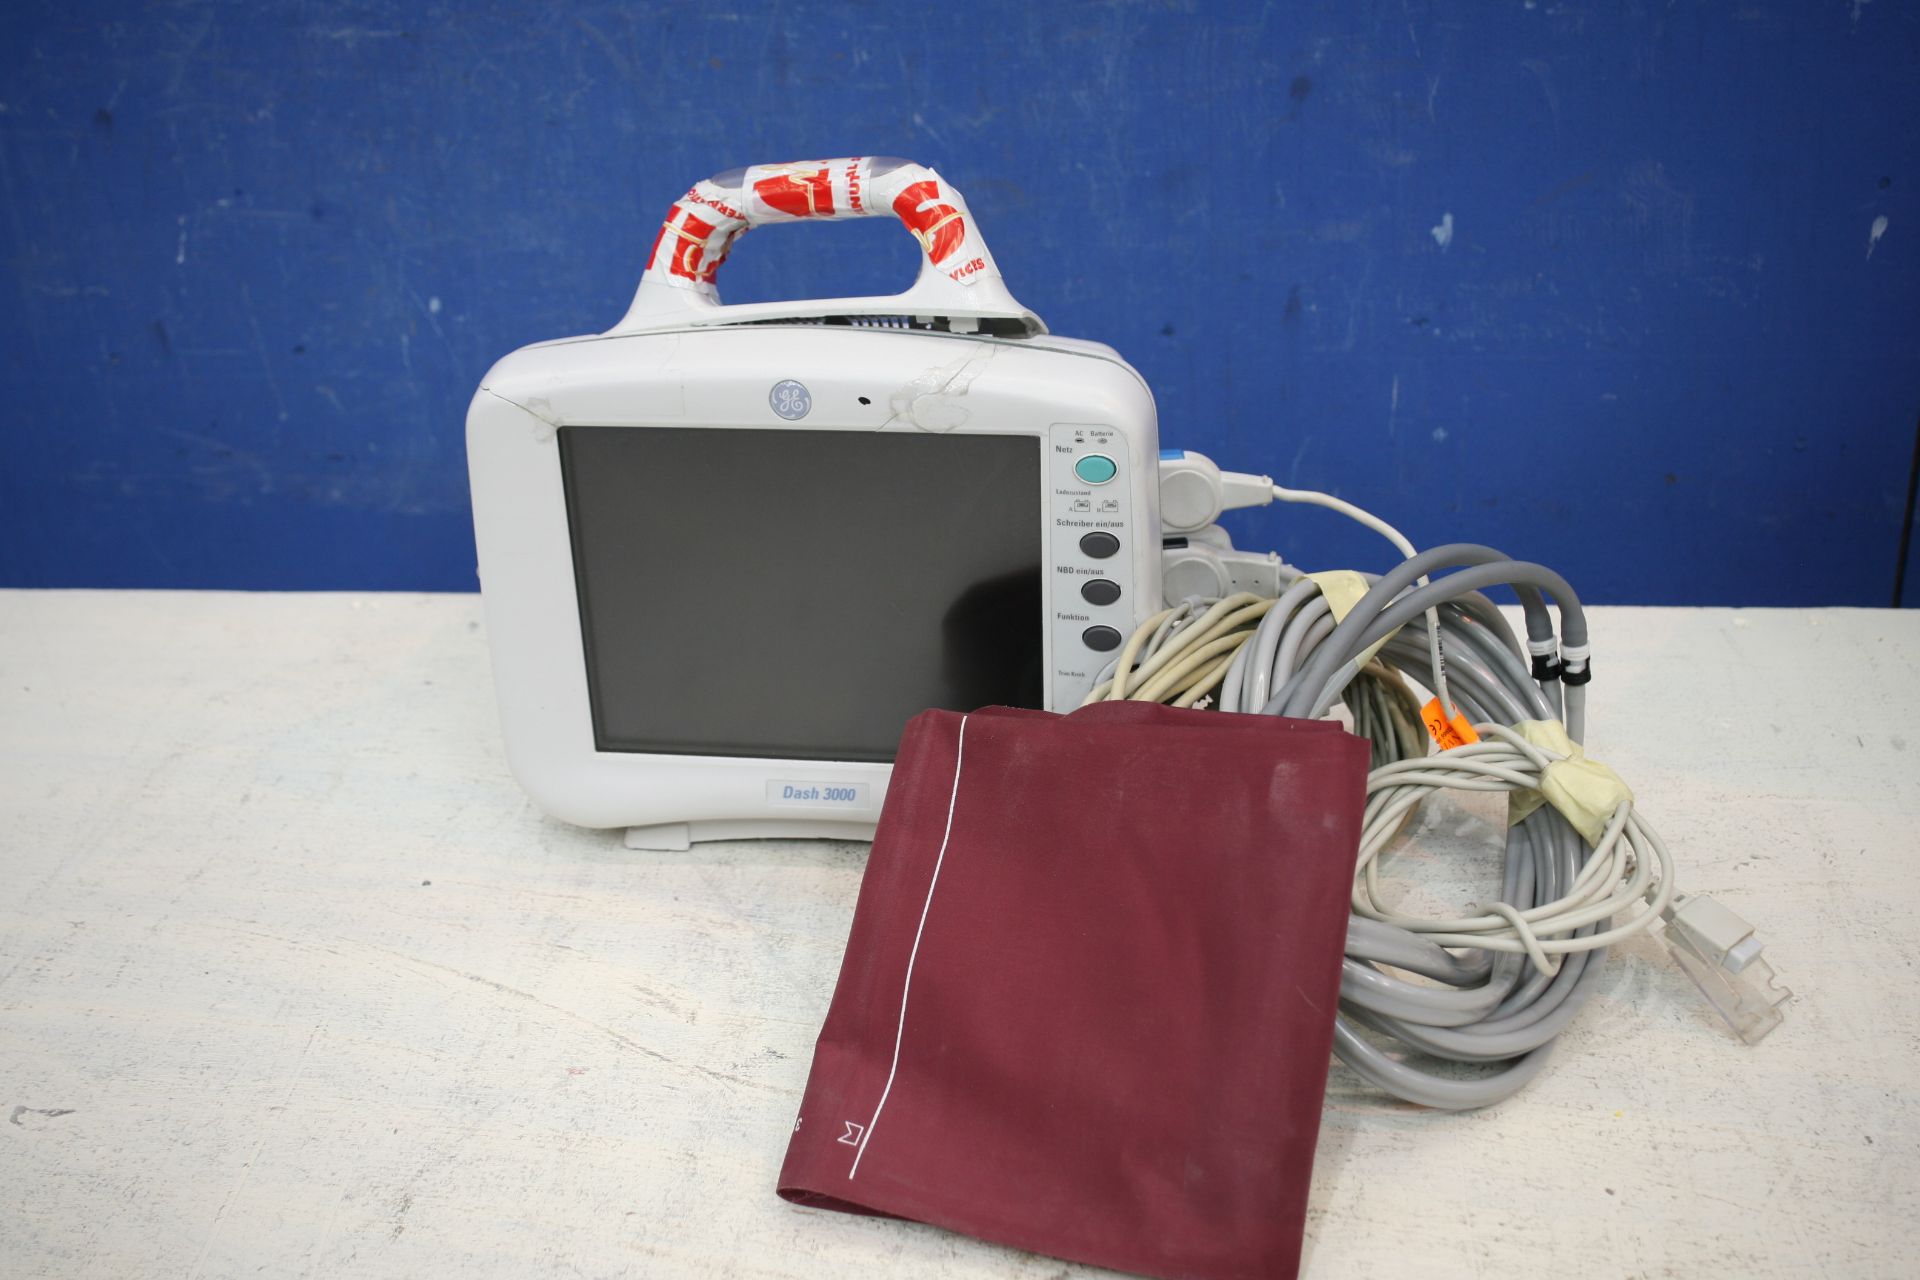 GE Dash 3000 Patient Monitor With ECG Leads And Blood Pressure Cuff *Damaged Handle*